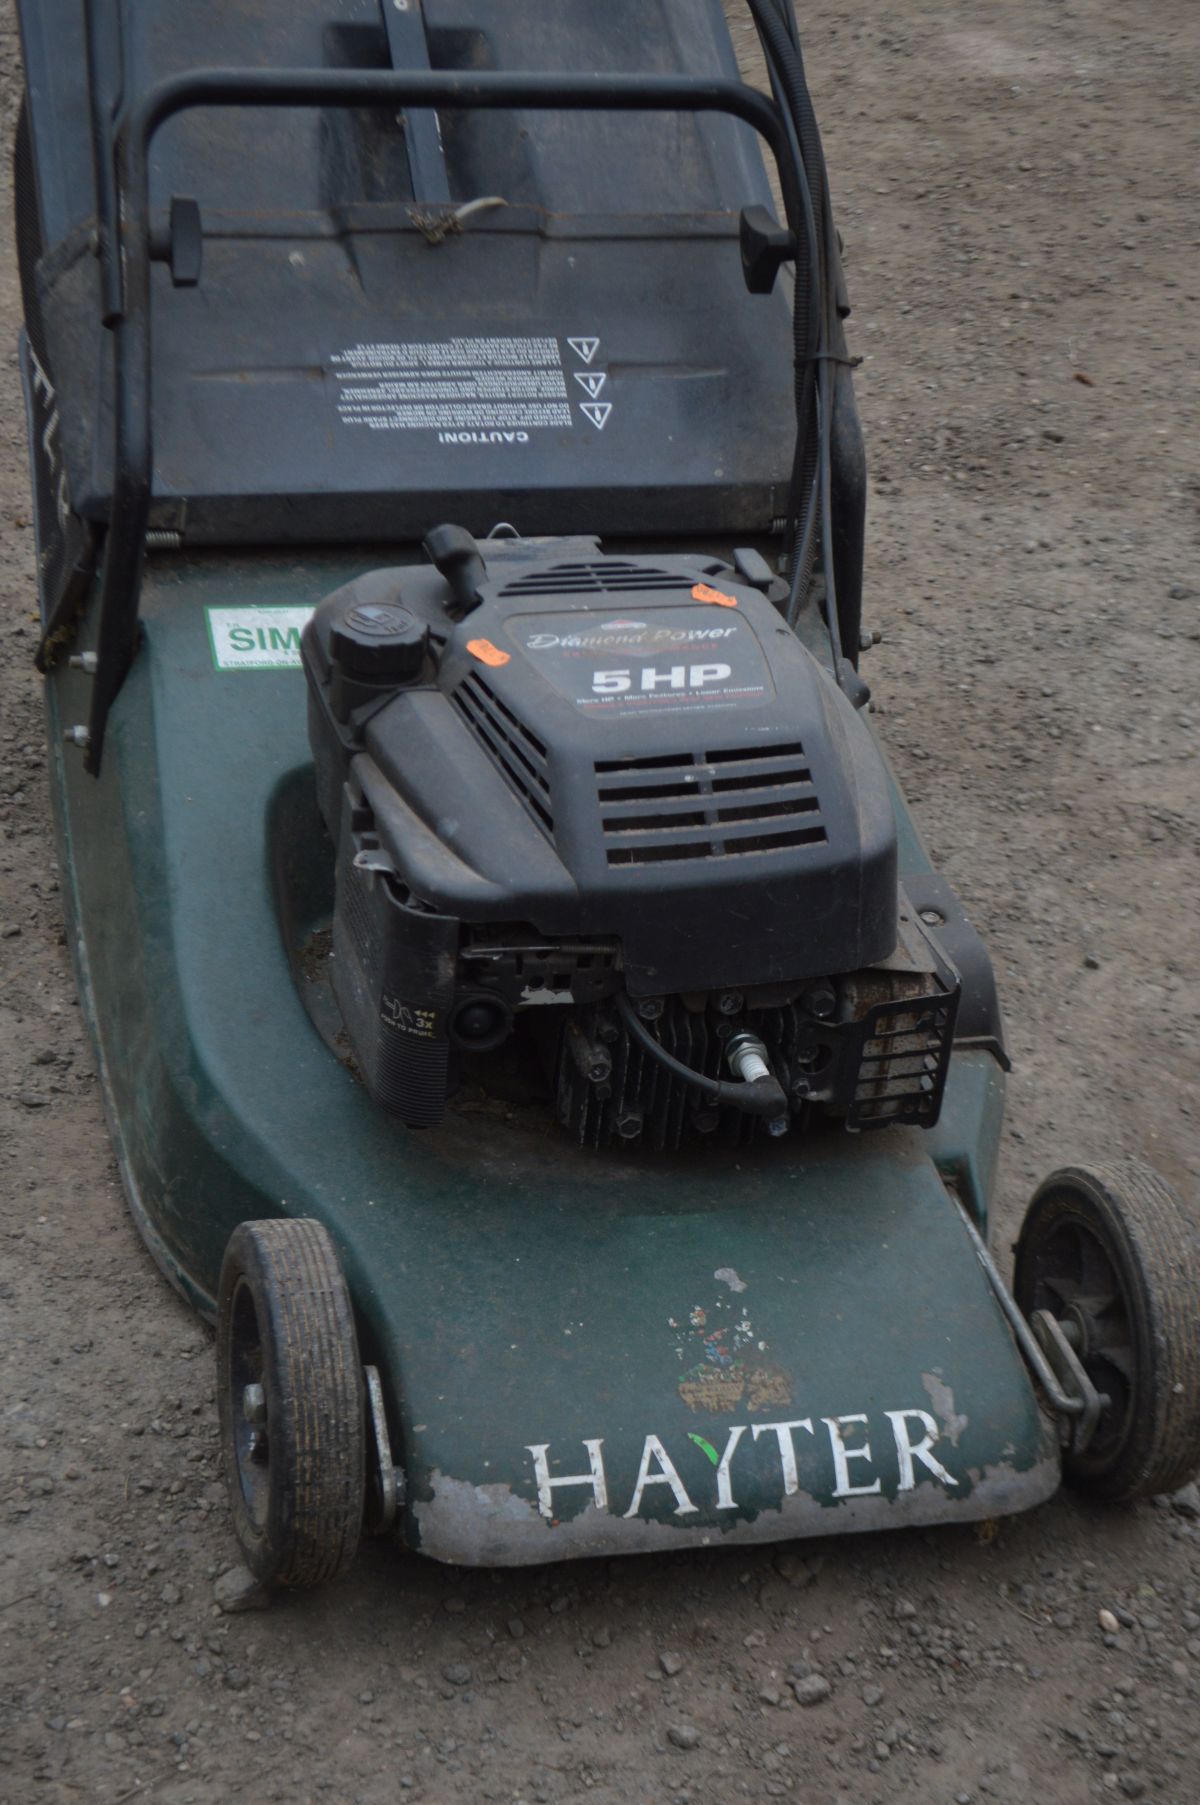 A HAYTER PETROL SELF PROPELLED ROLLER LAWNMOWER battery key start and grassbox - Image 2 of 2